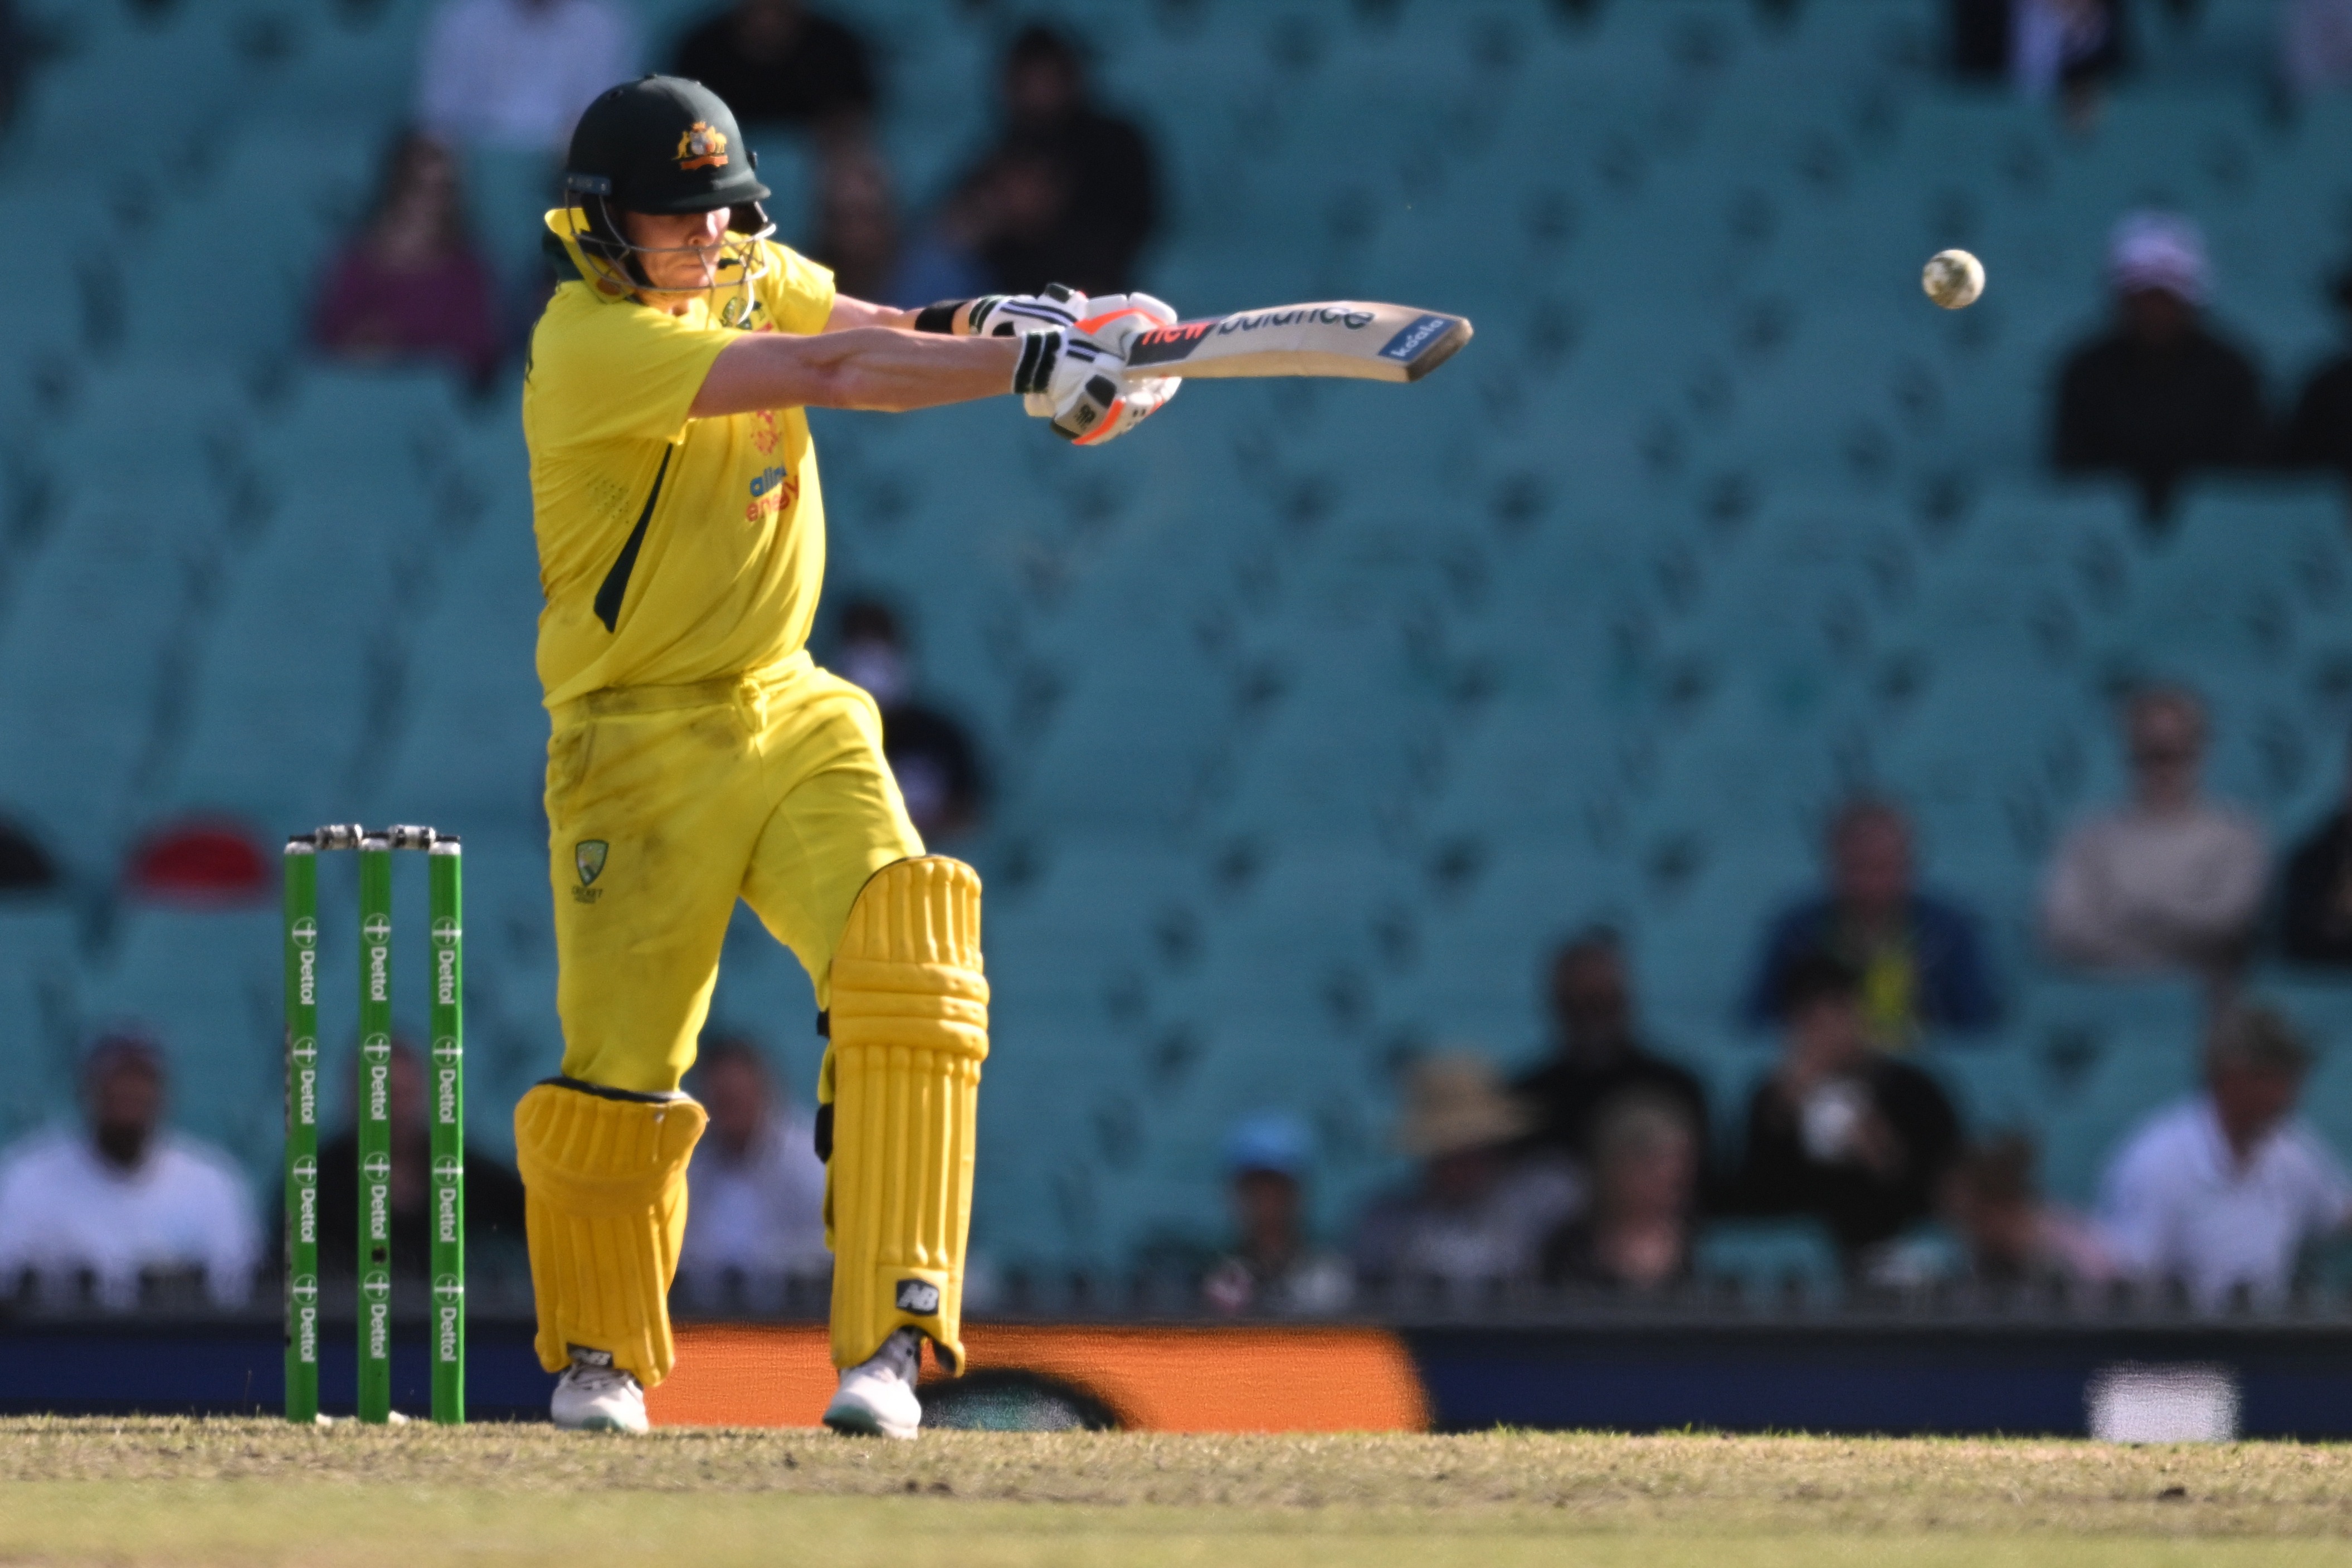 , England’s World Cup hangover worsens as they lose series to Australia with 72-run defeat in second ODI in Sydney